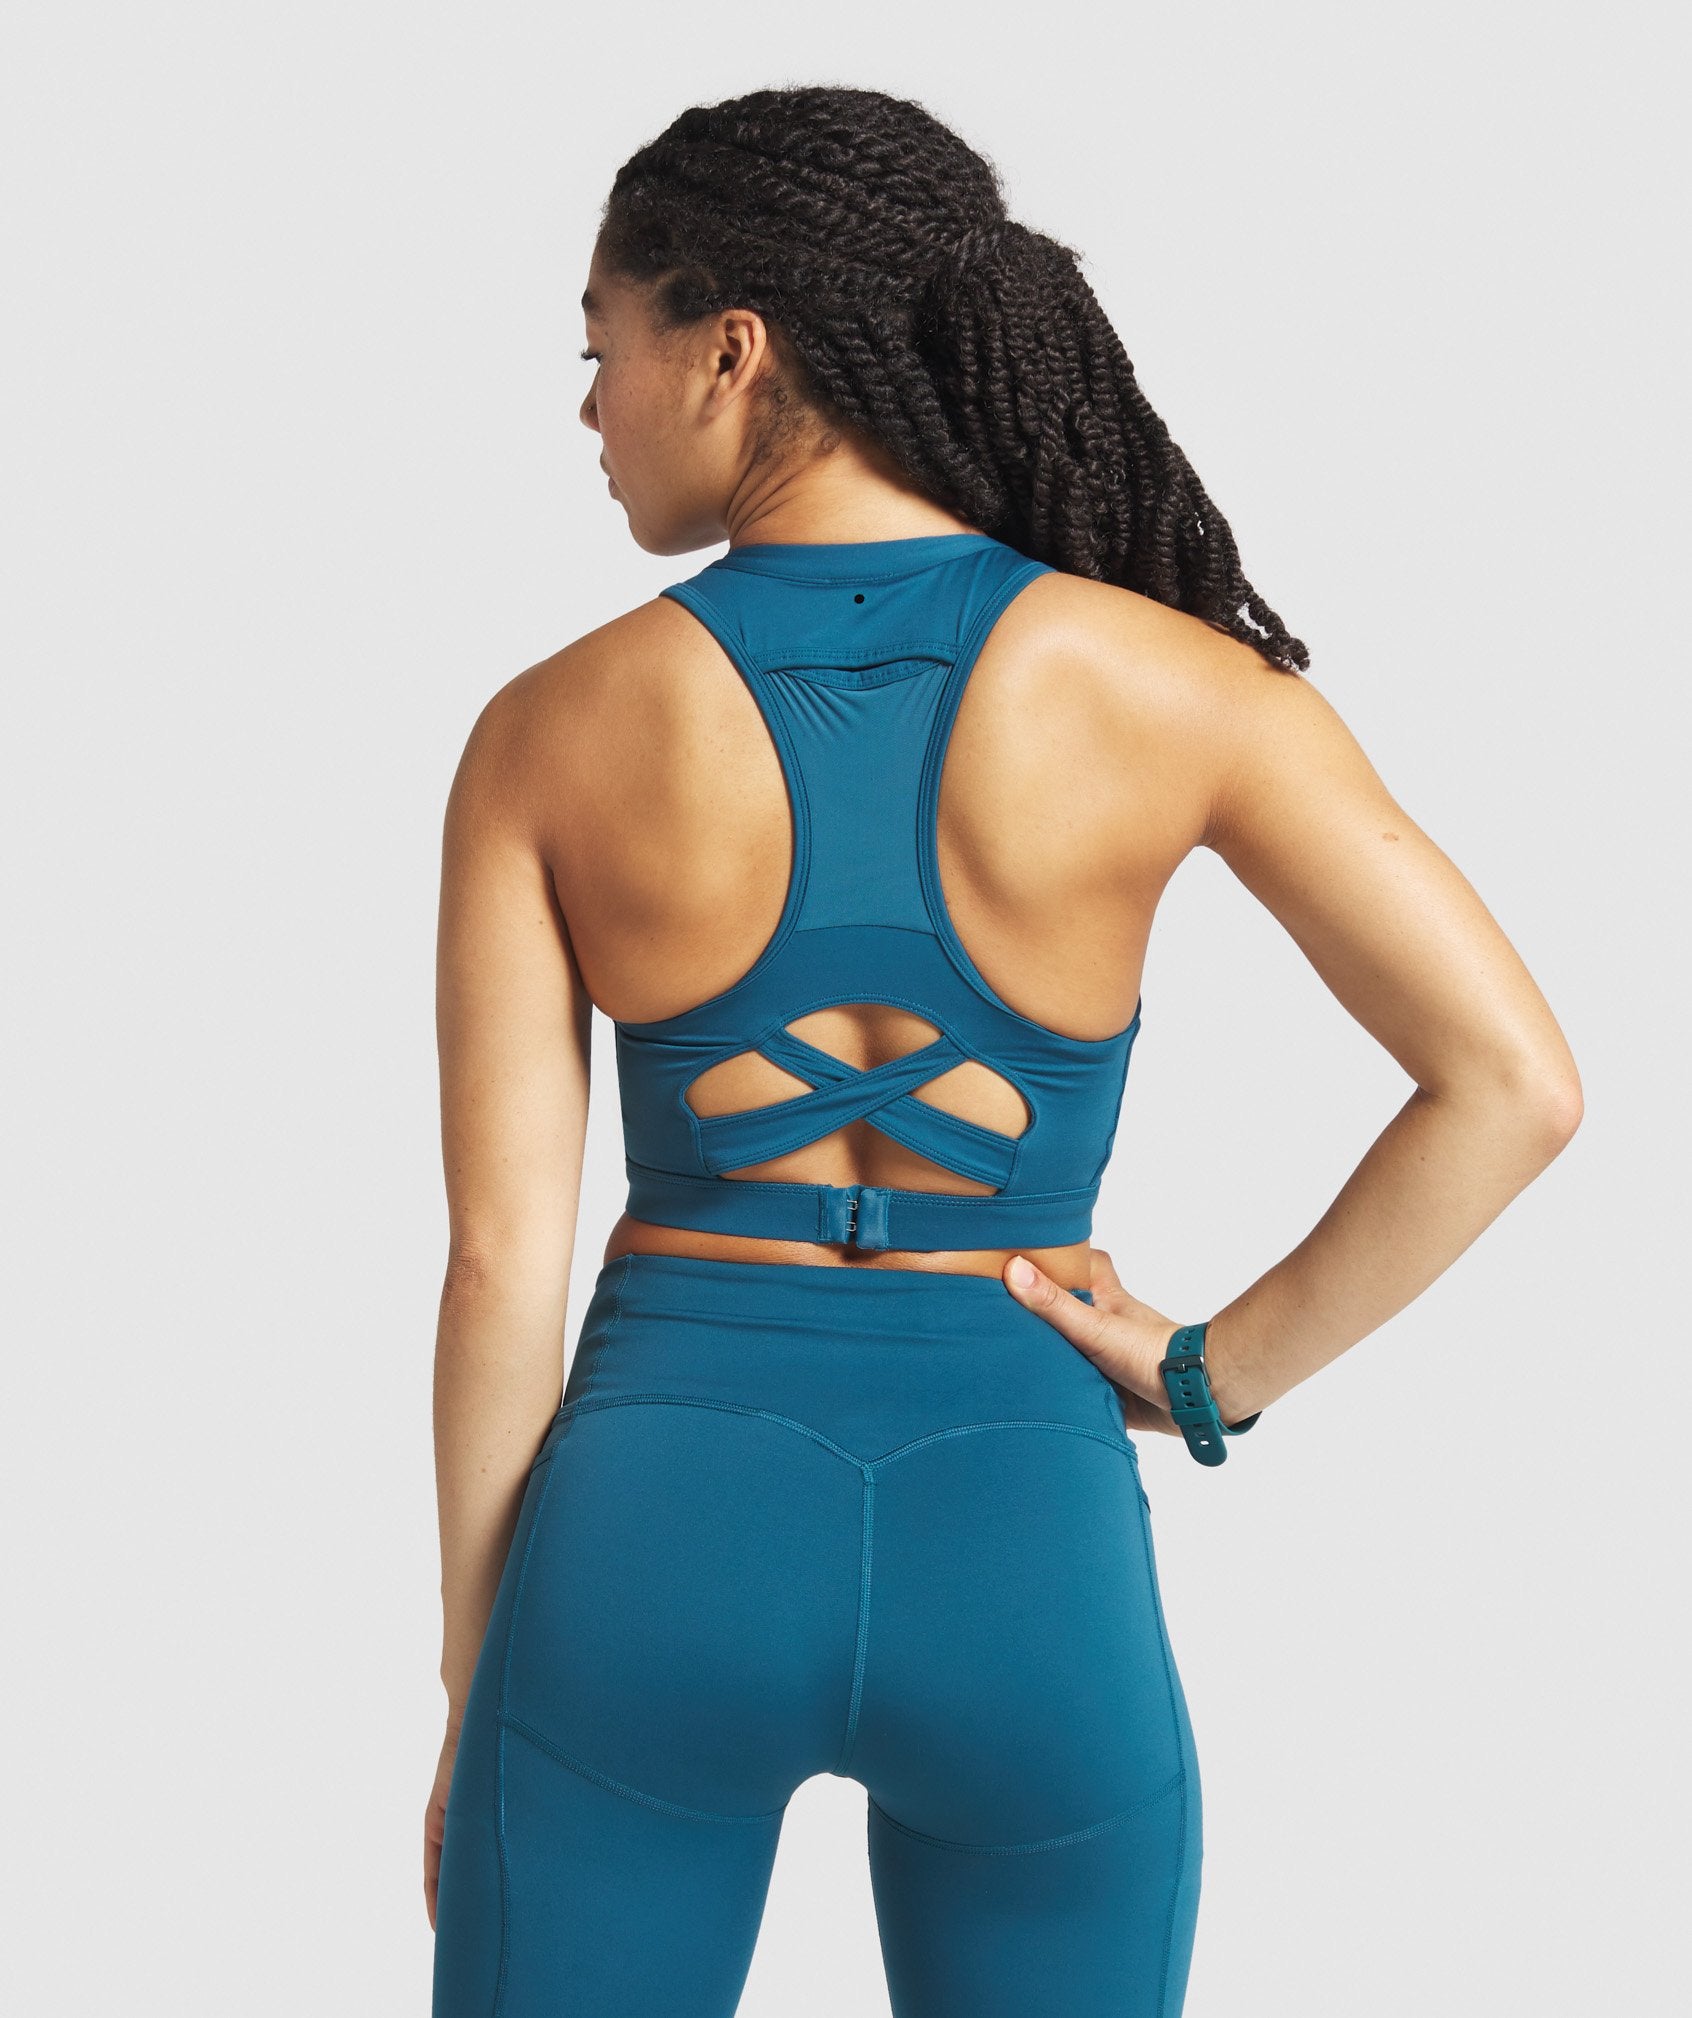 Speed Sports Bra in Teal - view 3